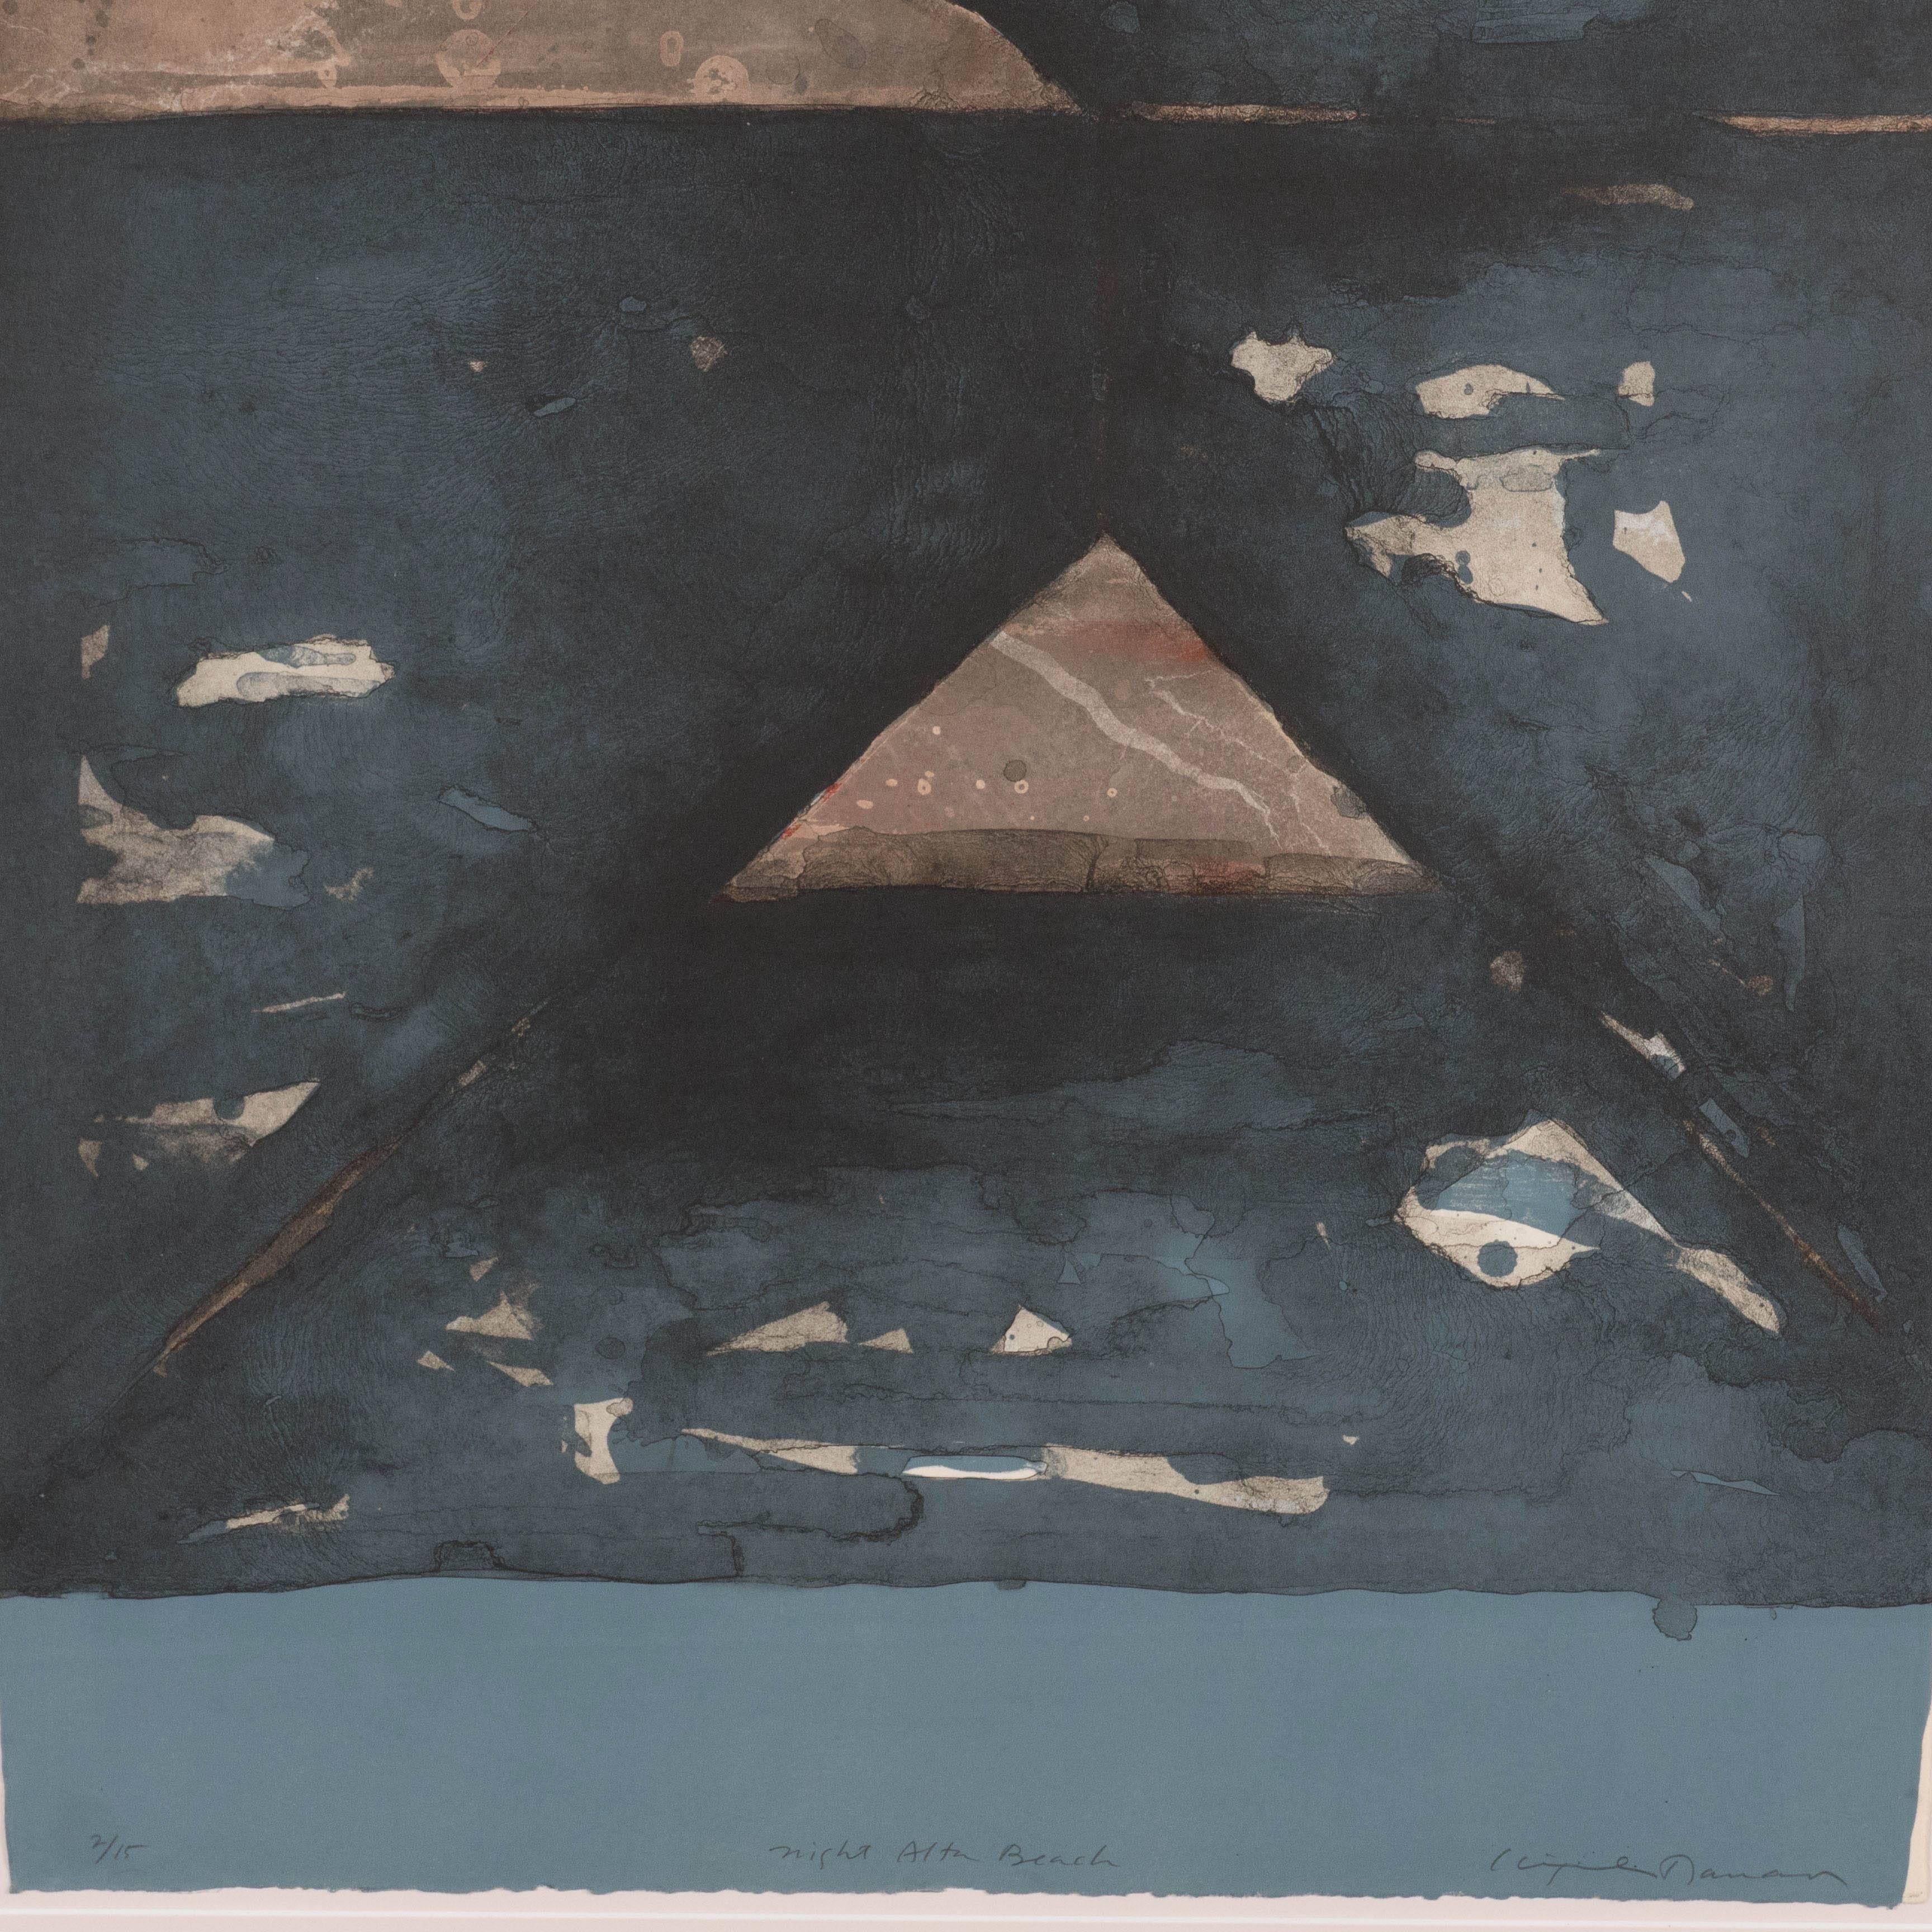 A Mid-Century abstract expressionist original piece by artist Kenjilo Nanano. This piece appears to portray the horizon of a seascape view with mountains and clouds, in shades of teal, blue and grey. It is in excellent condition.

Since the early